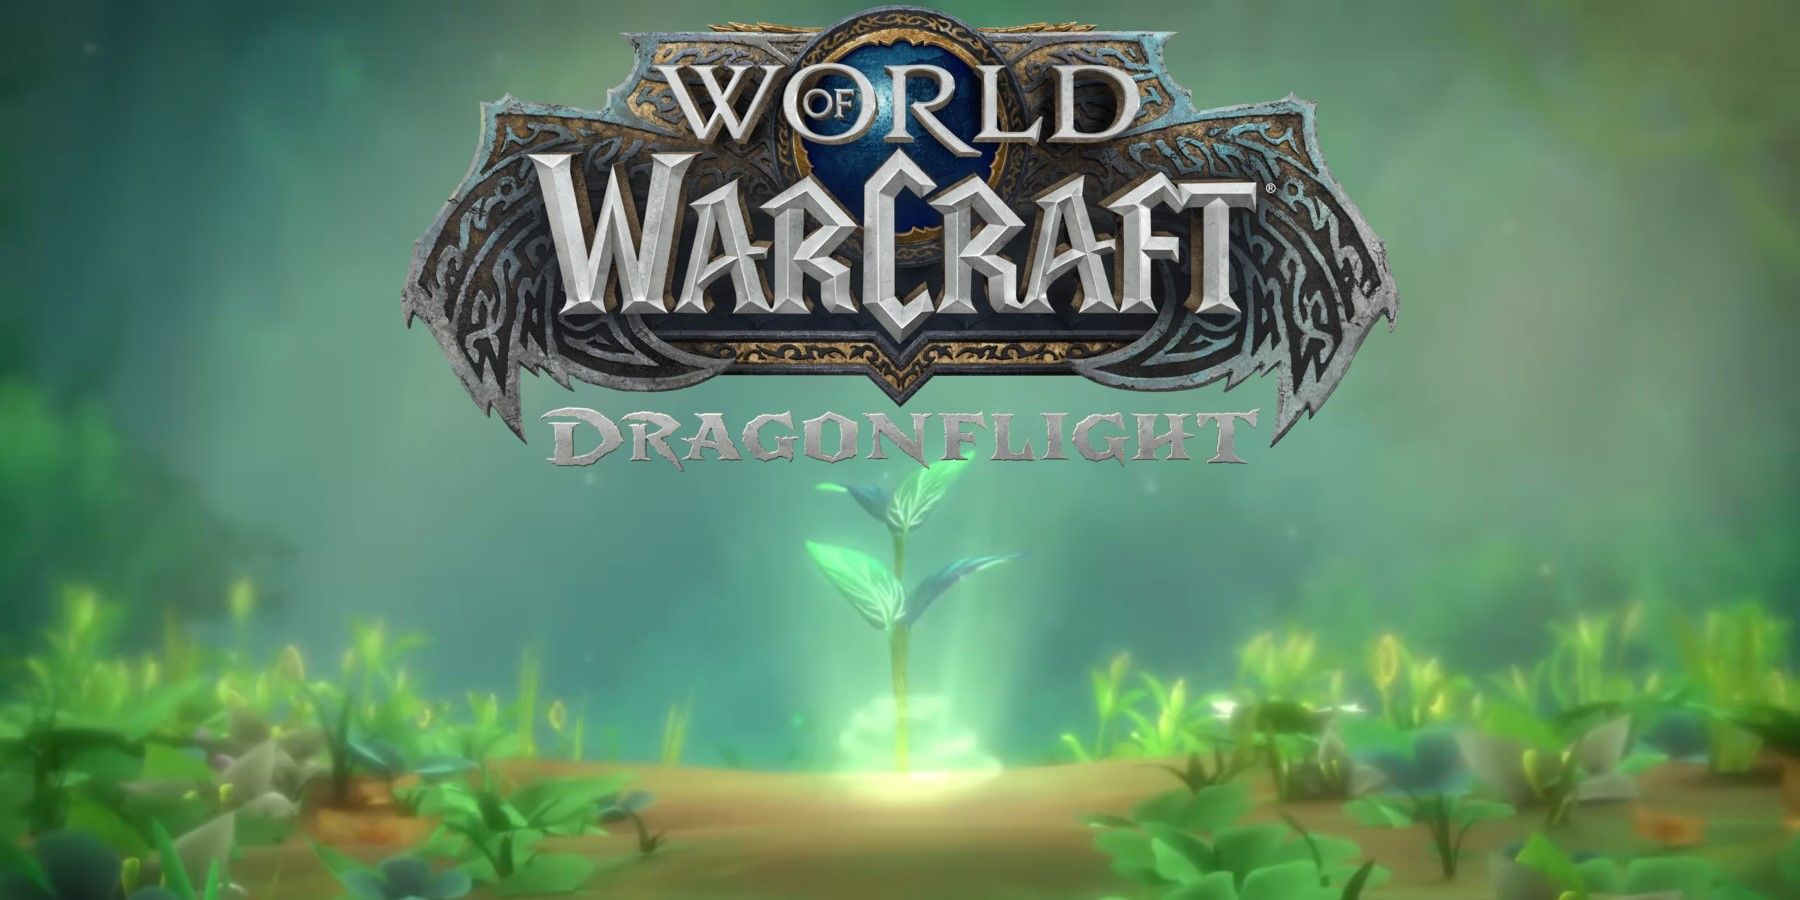 World of Warcraft Might Have Accidentally Leaked Dragonflight 10.2